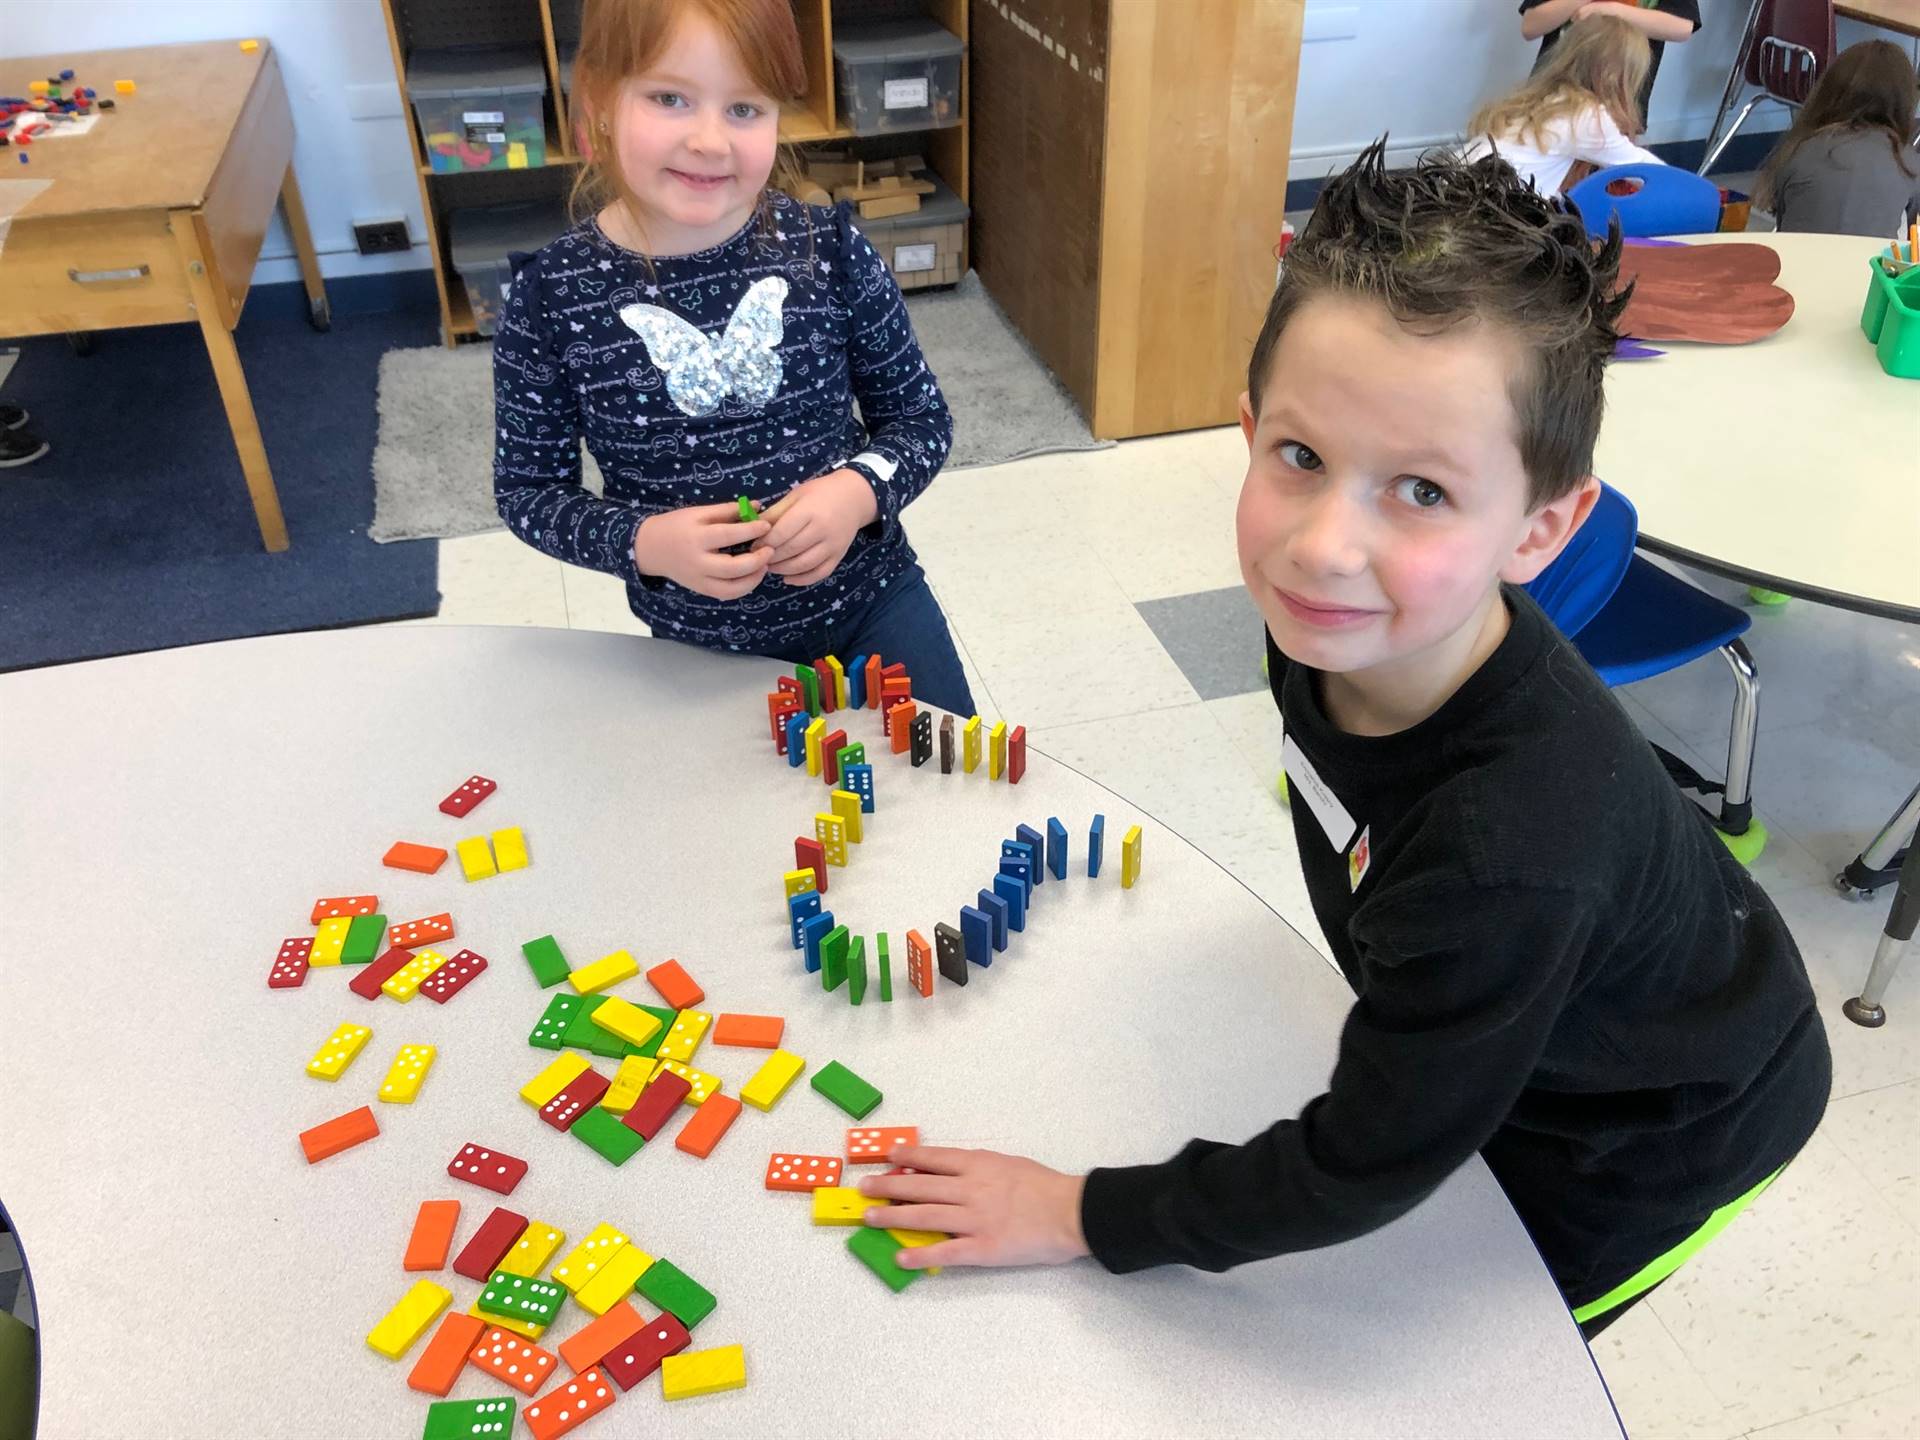 2 students build with 100 blocks.